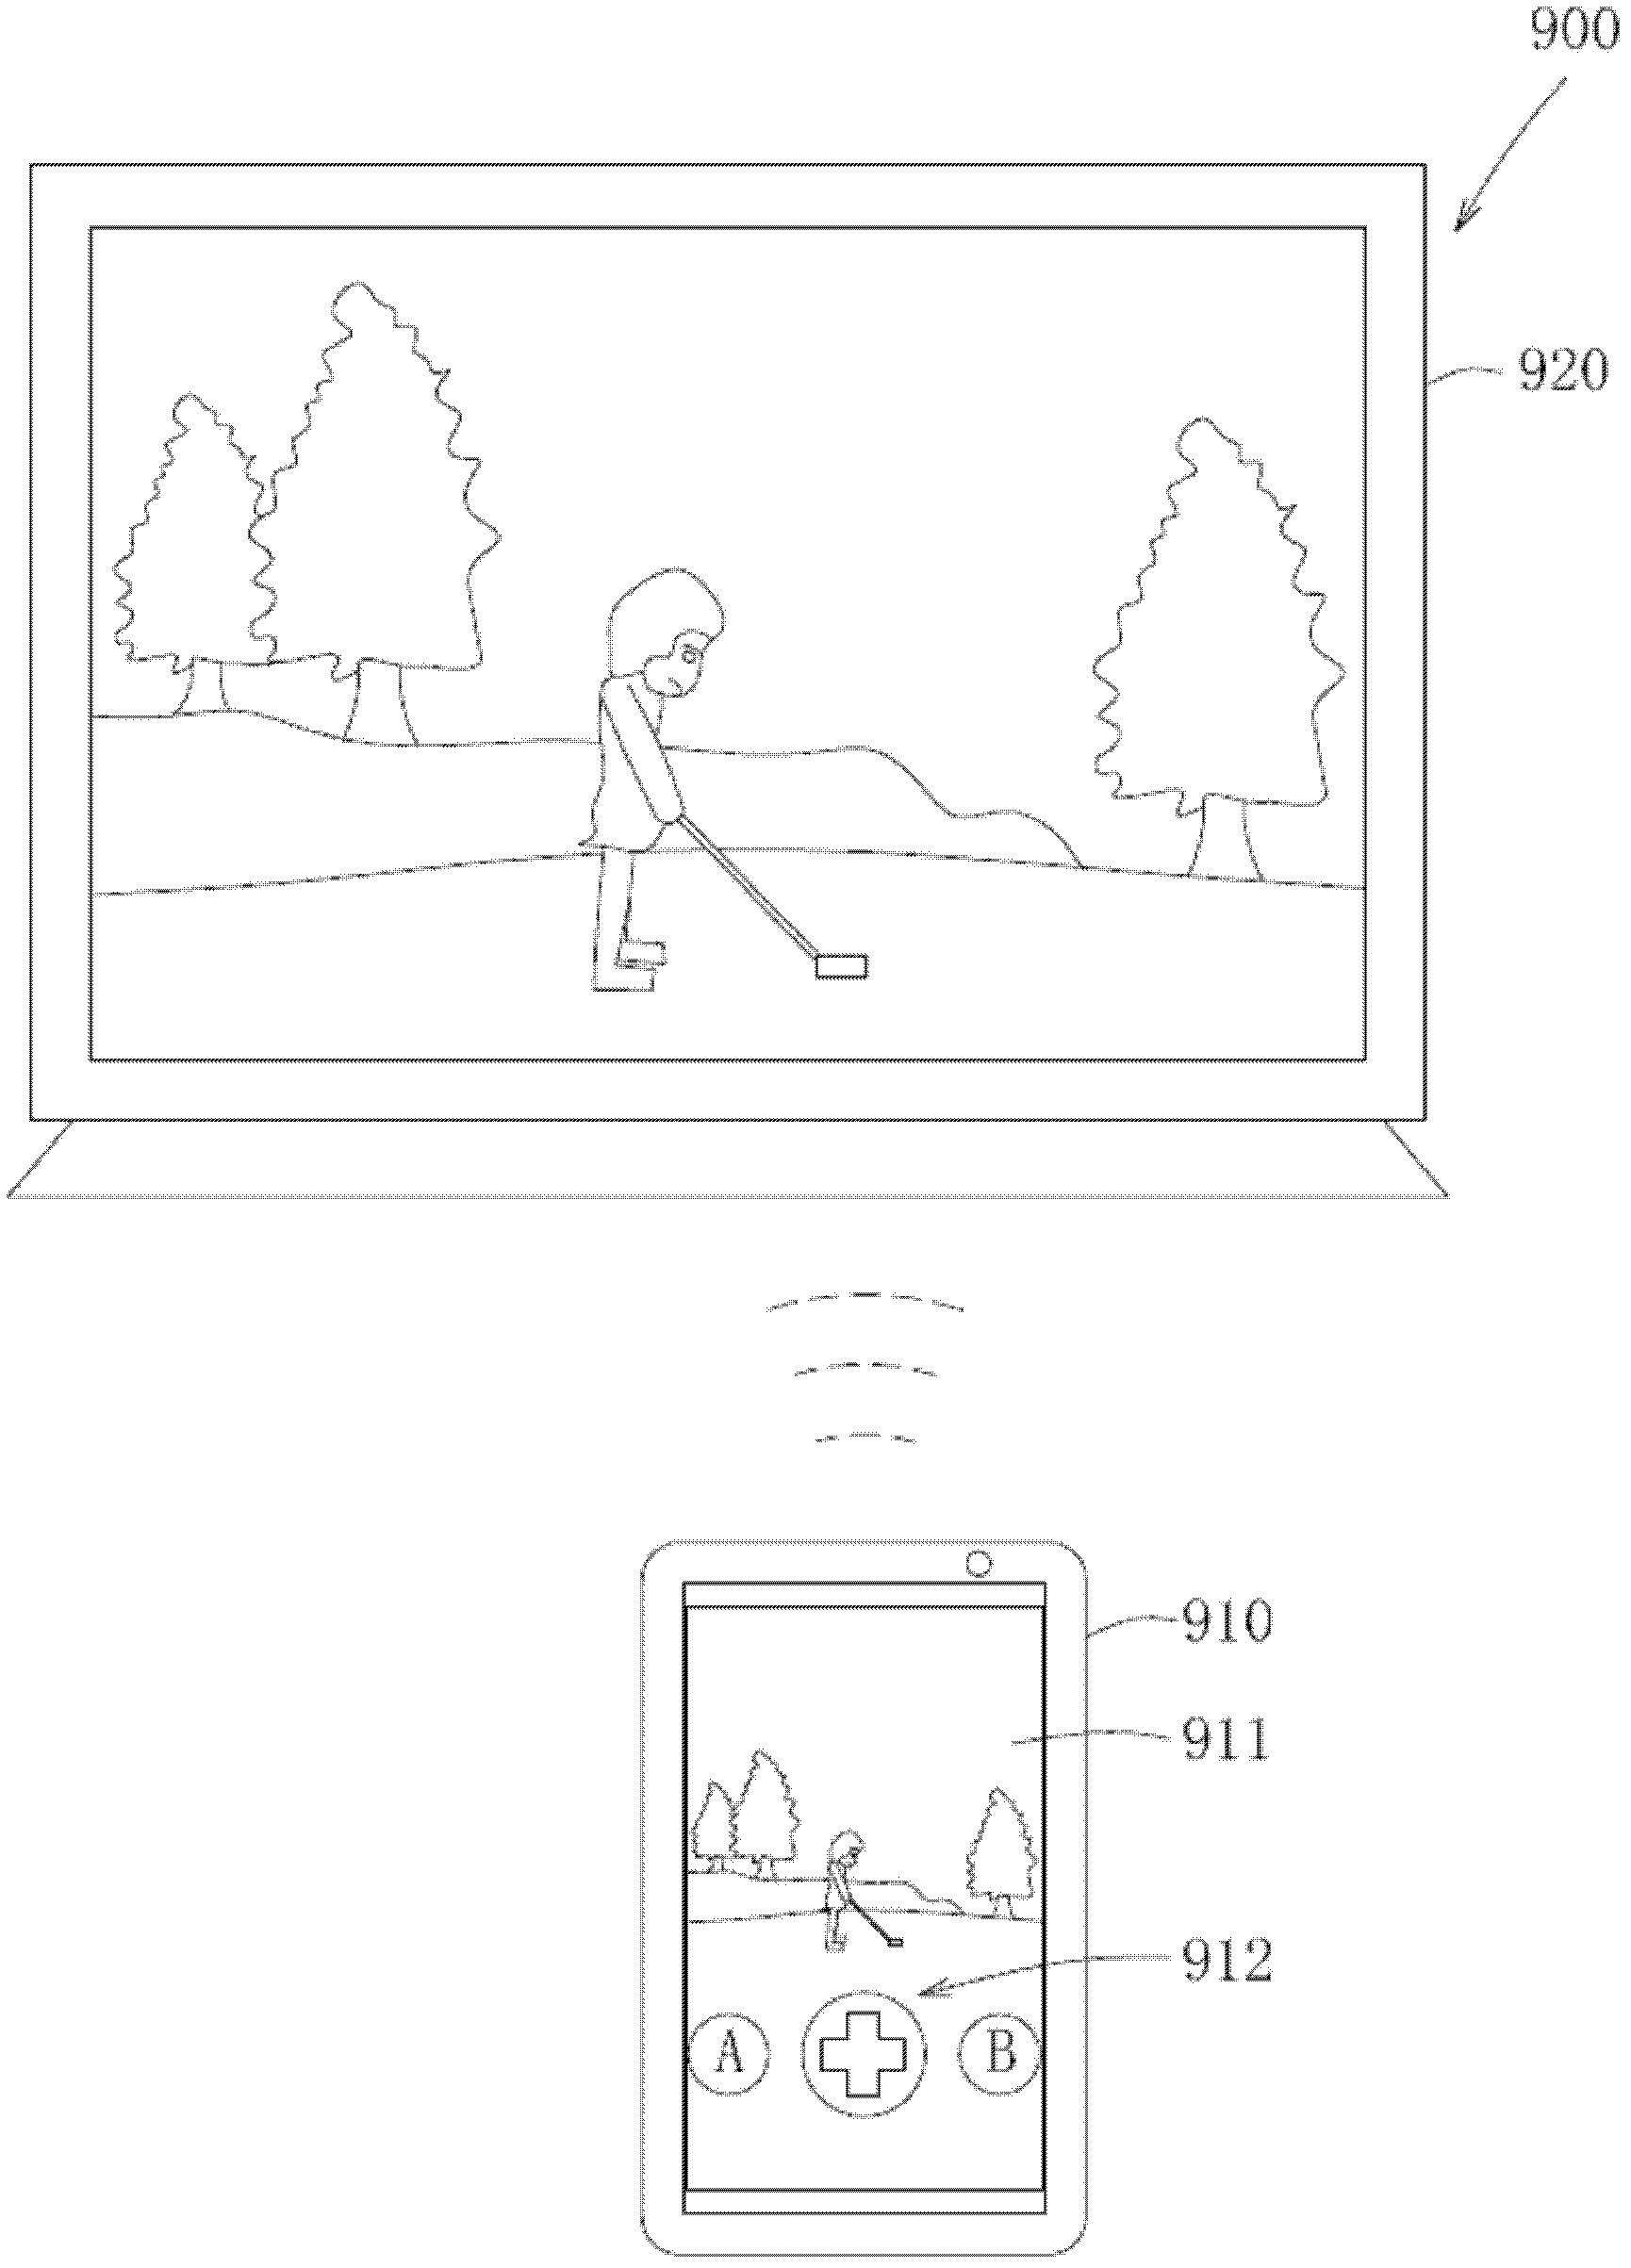 Mobile device and method capable for interacting with electronic device having a display function.